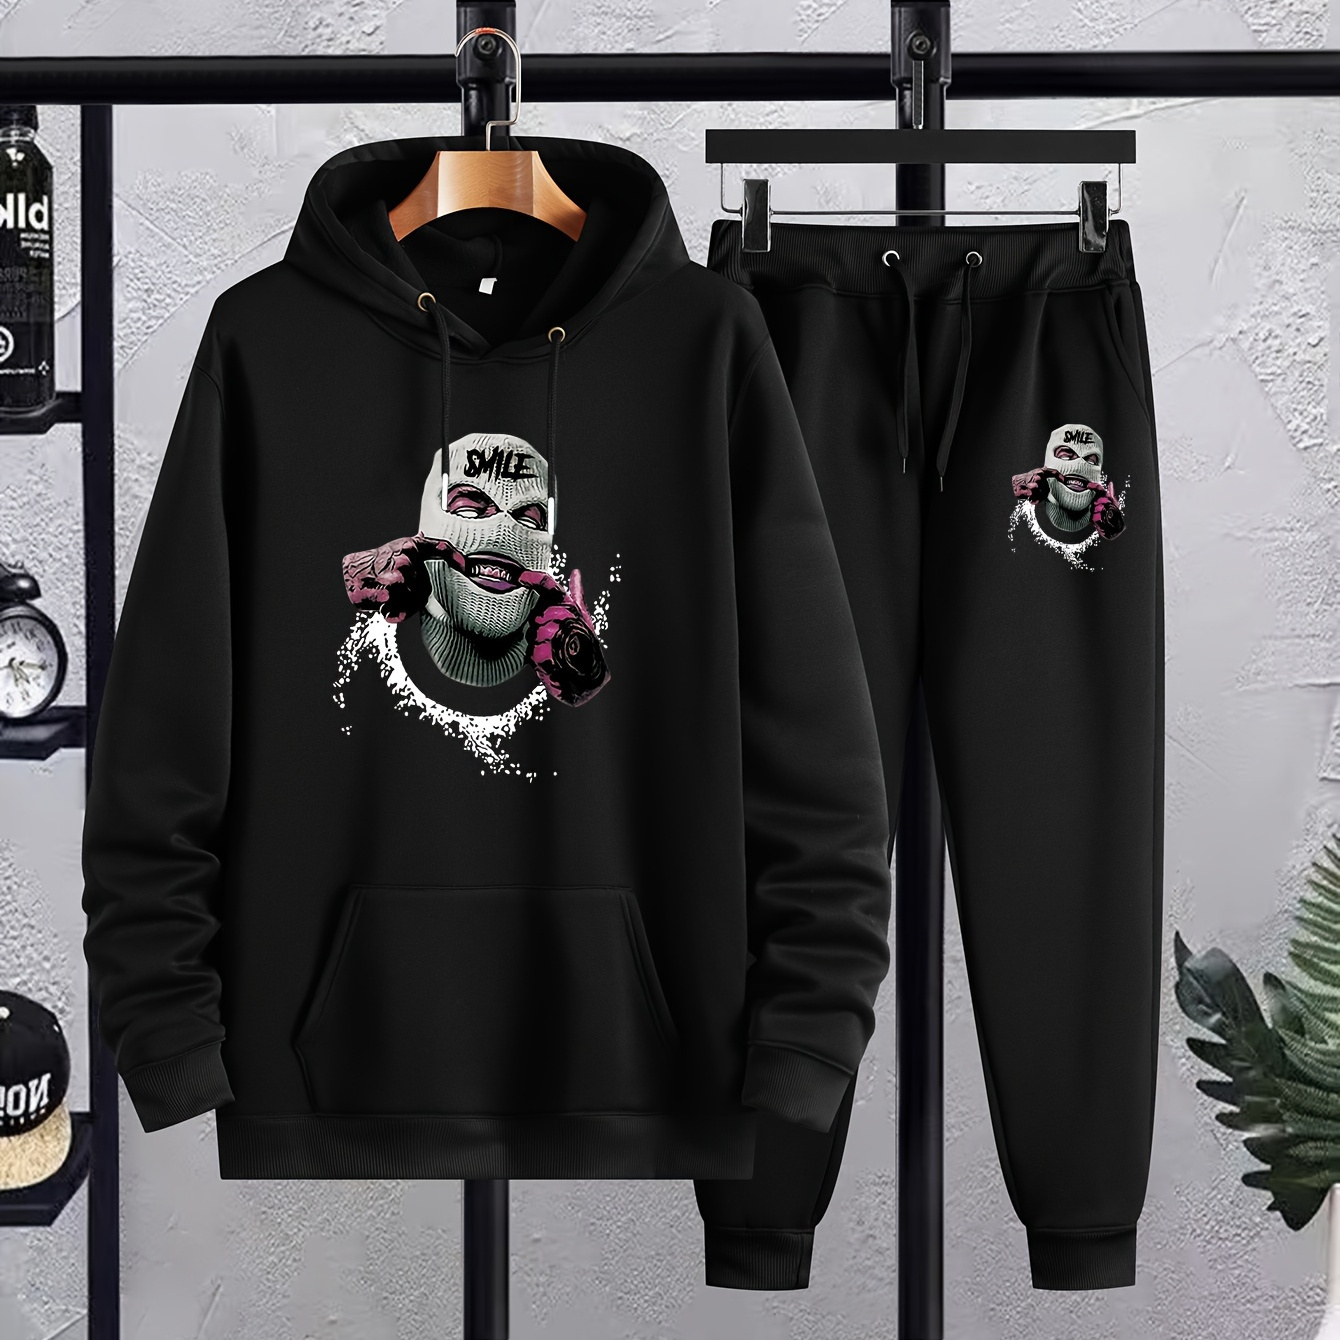 

Plus Size Men's Figure With Face Cover Graphic Print Hooded Sweatshirt & Sweatpants Set, Outdoor Fashion 2pcs Outfits